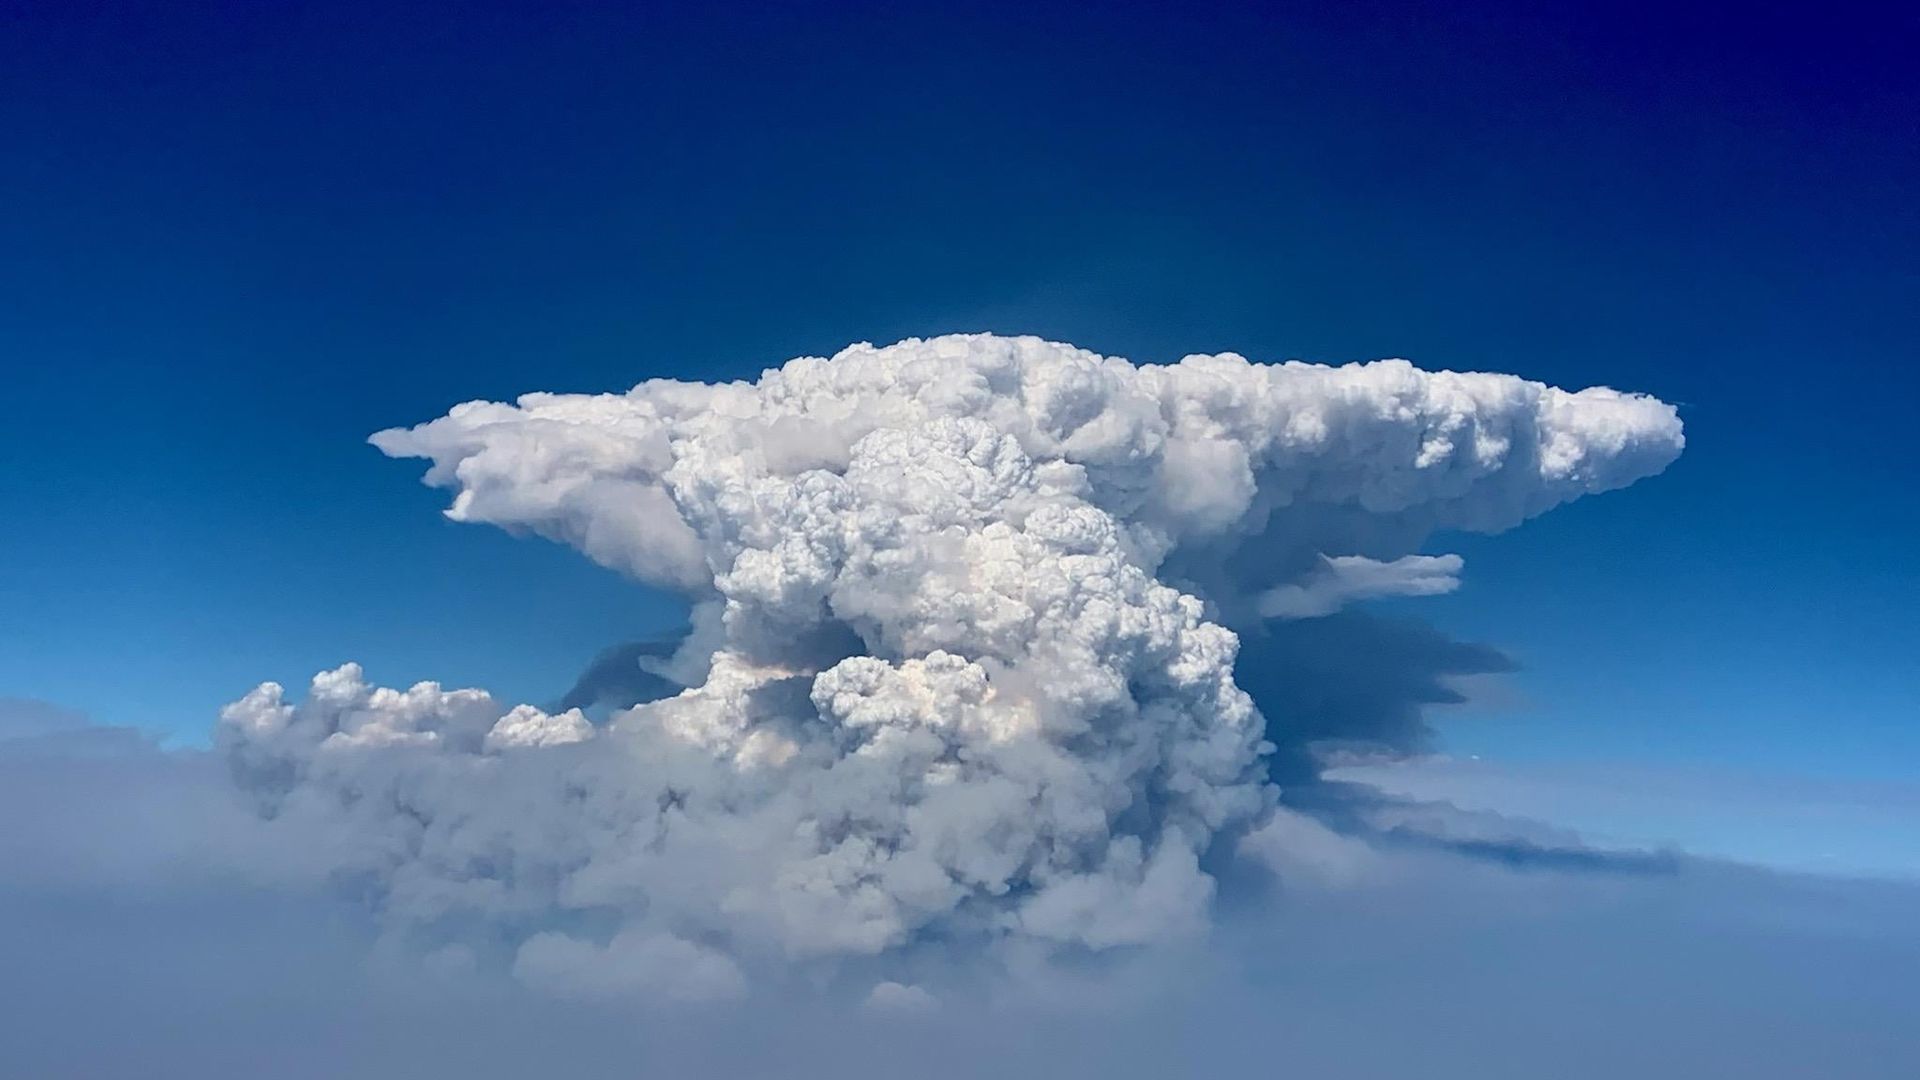 For multiple days in a row, 30,000+ foot pyrocumulus clouds have formed during extreme fire behavior